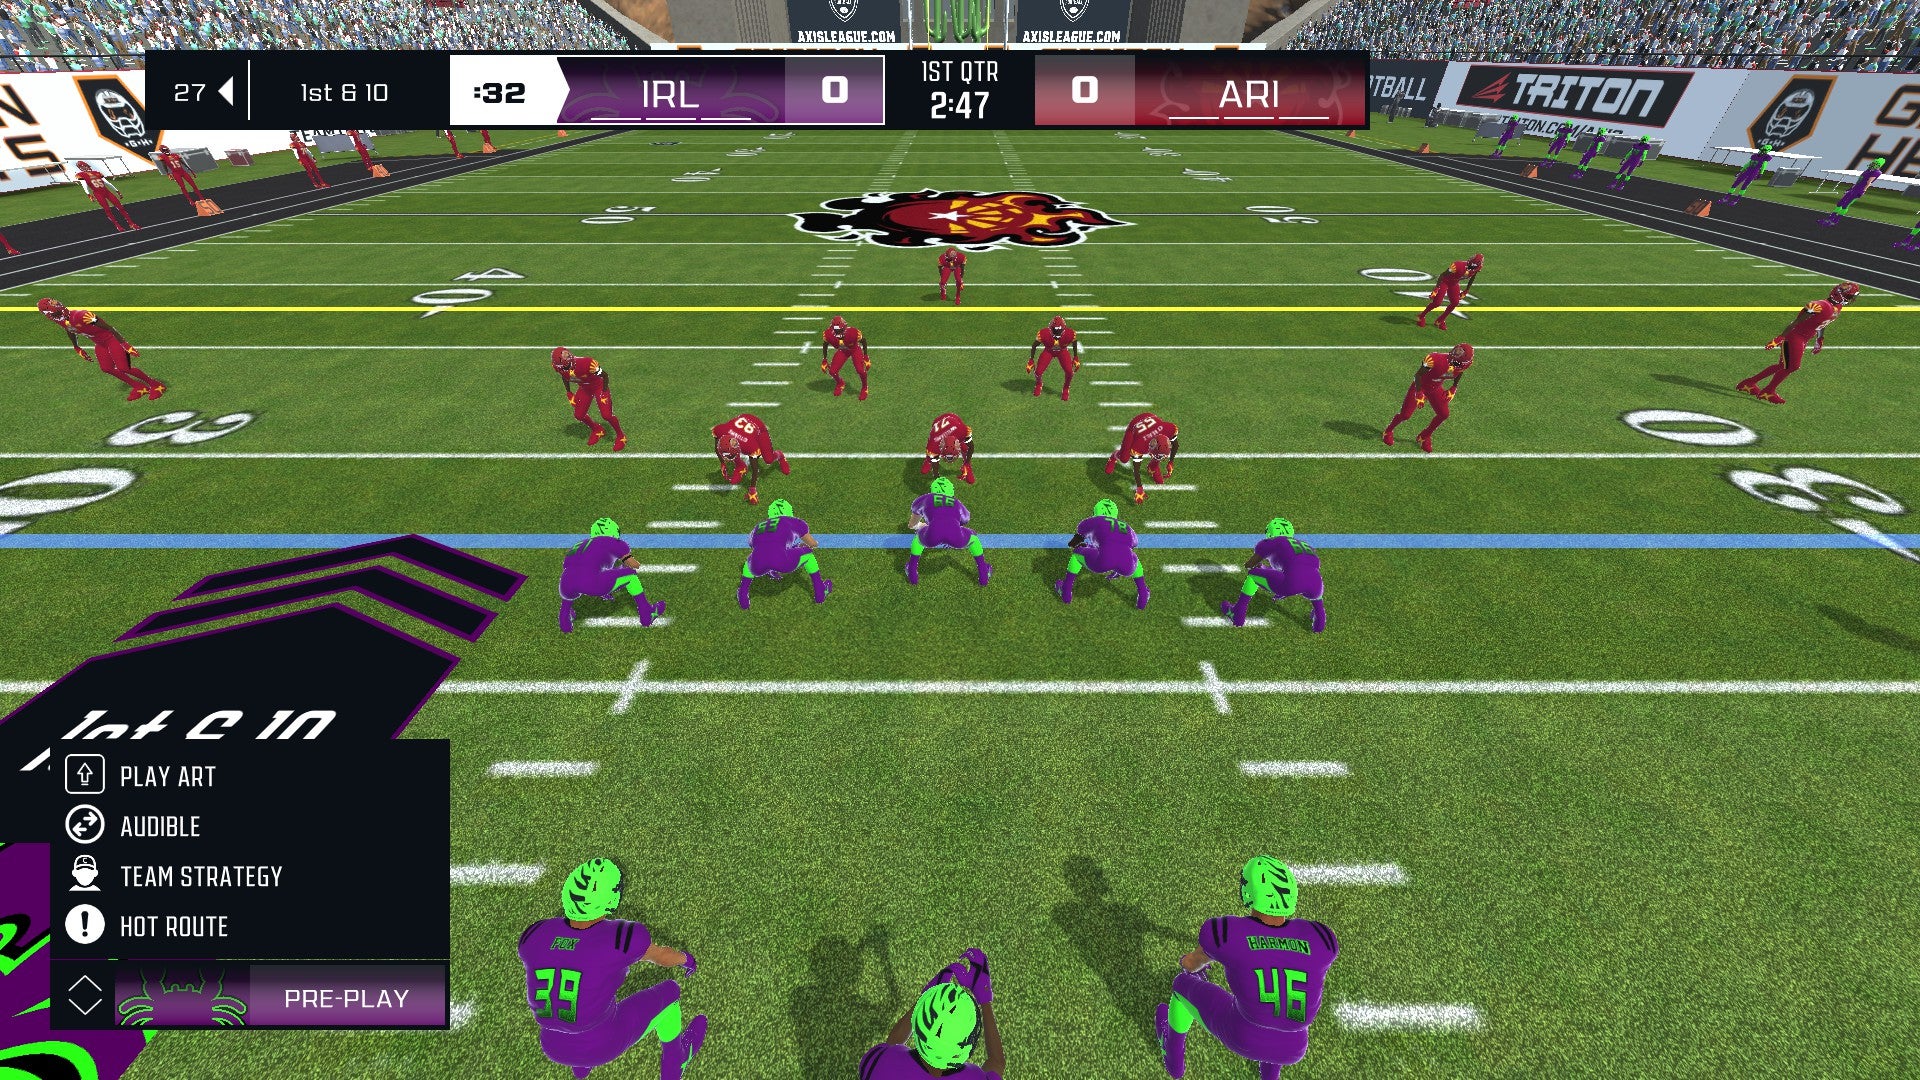 Two teams of American football players face off in Axis Football 2021